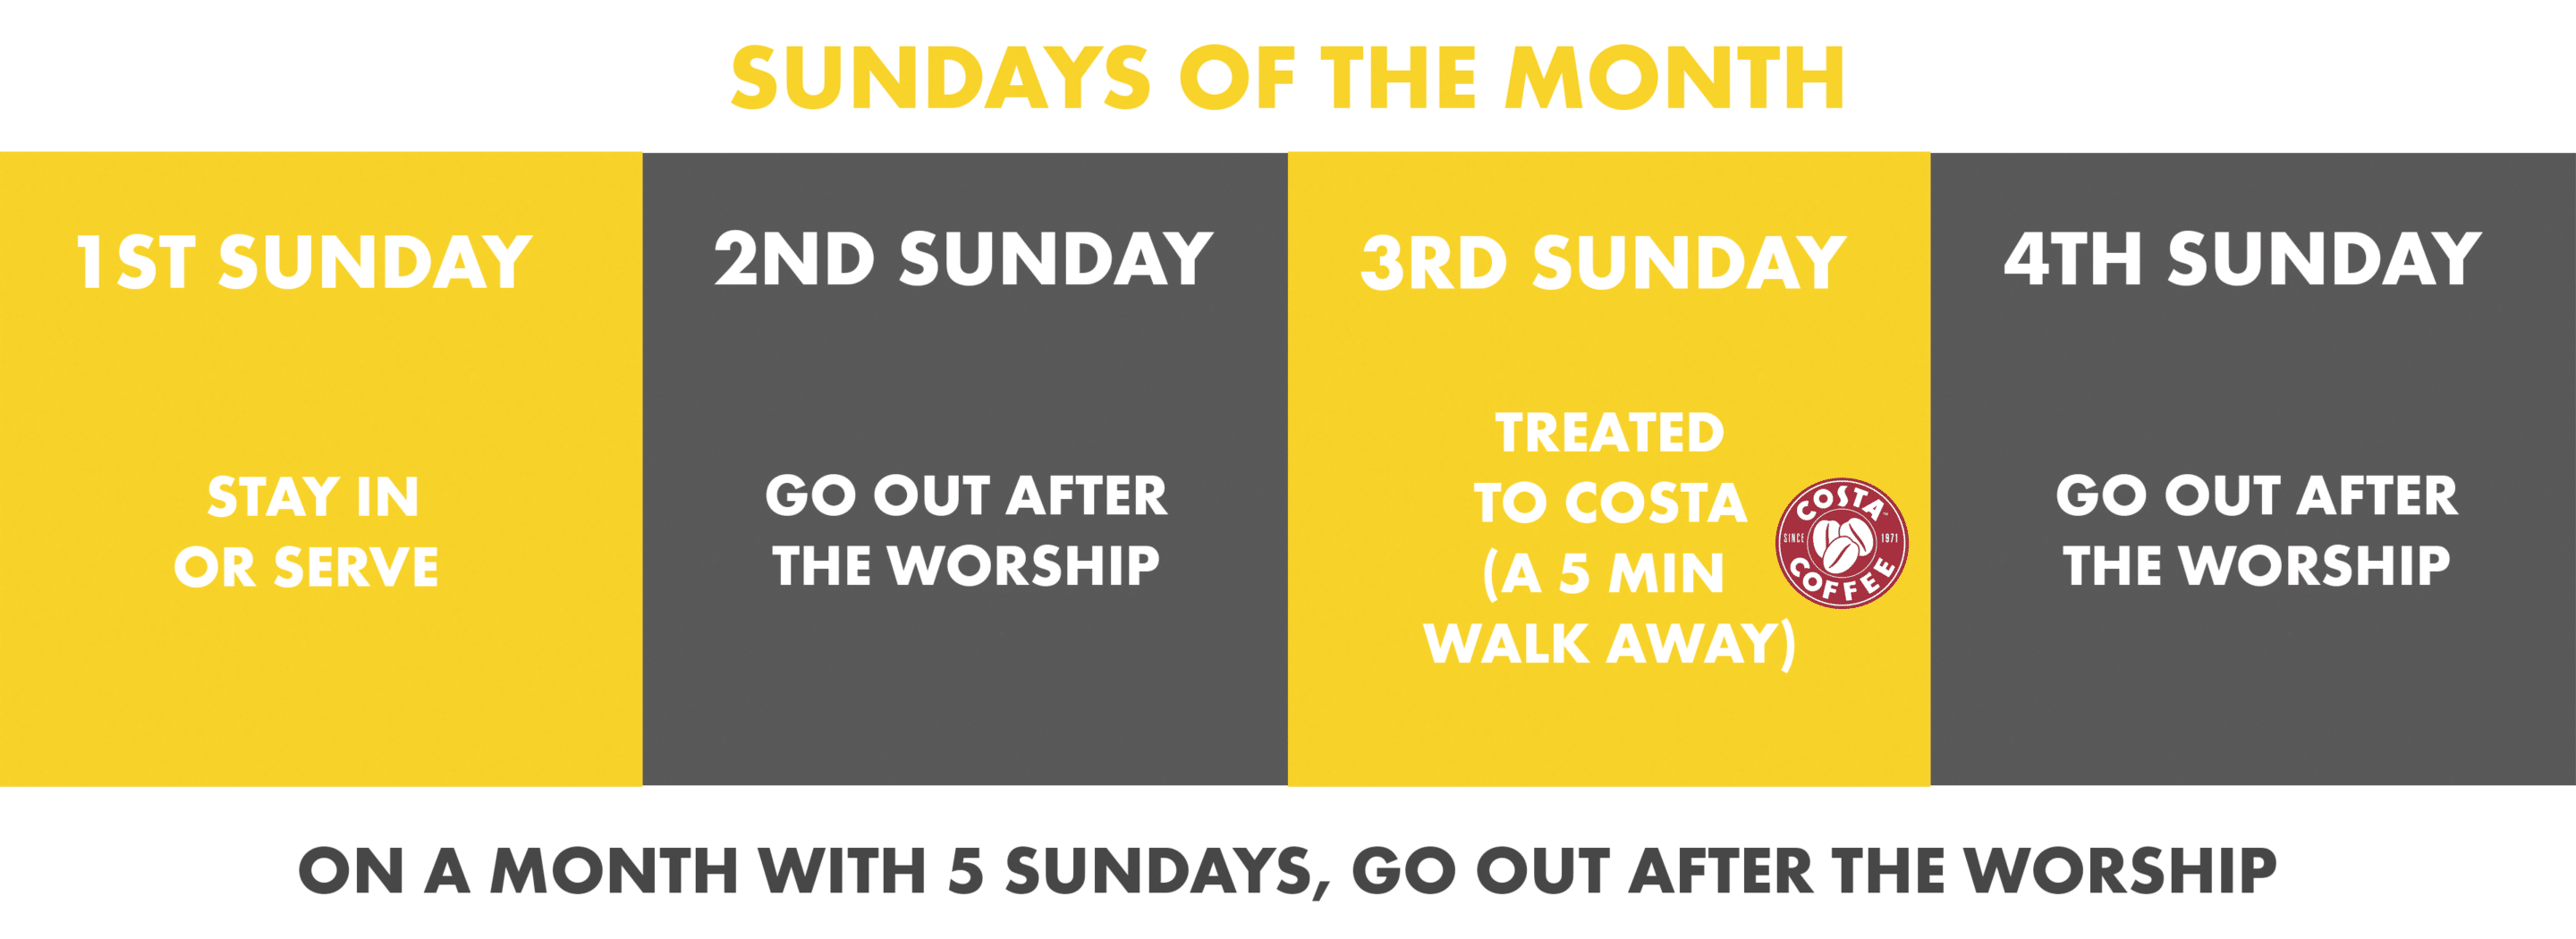 Sundays of the Month - YOUTH